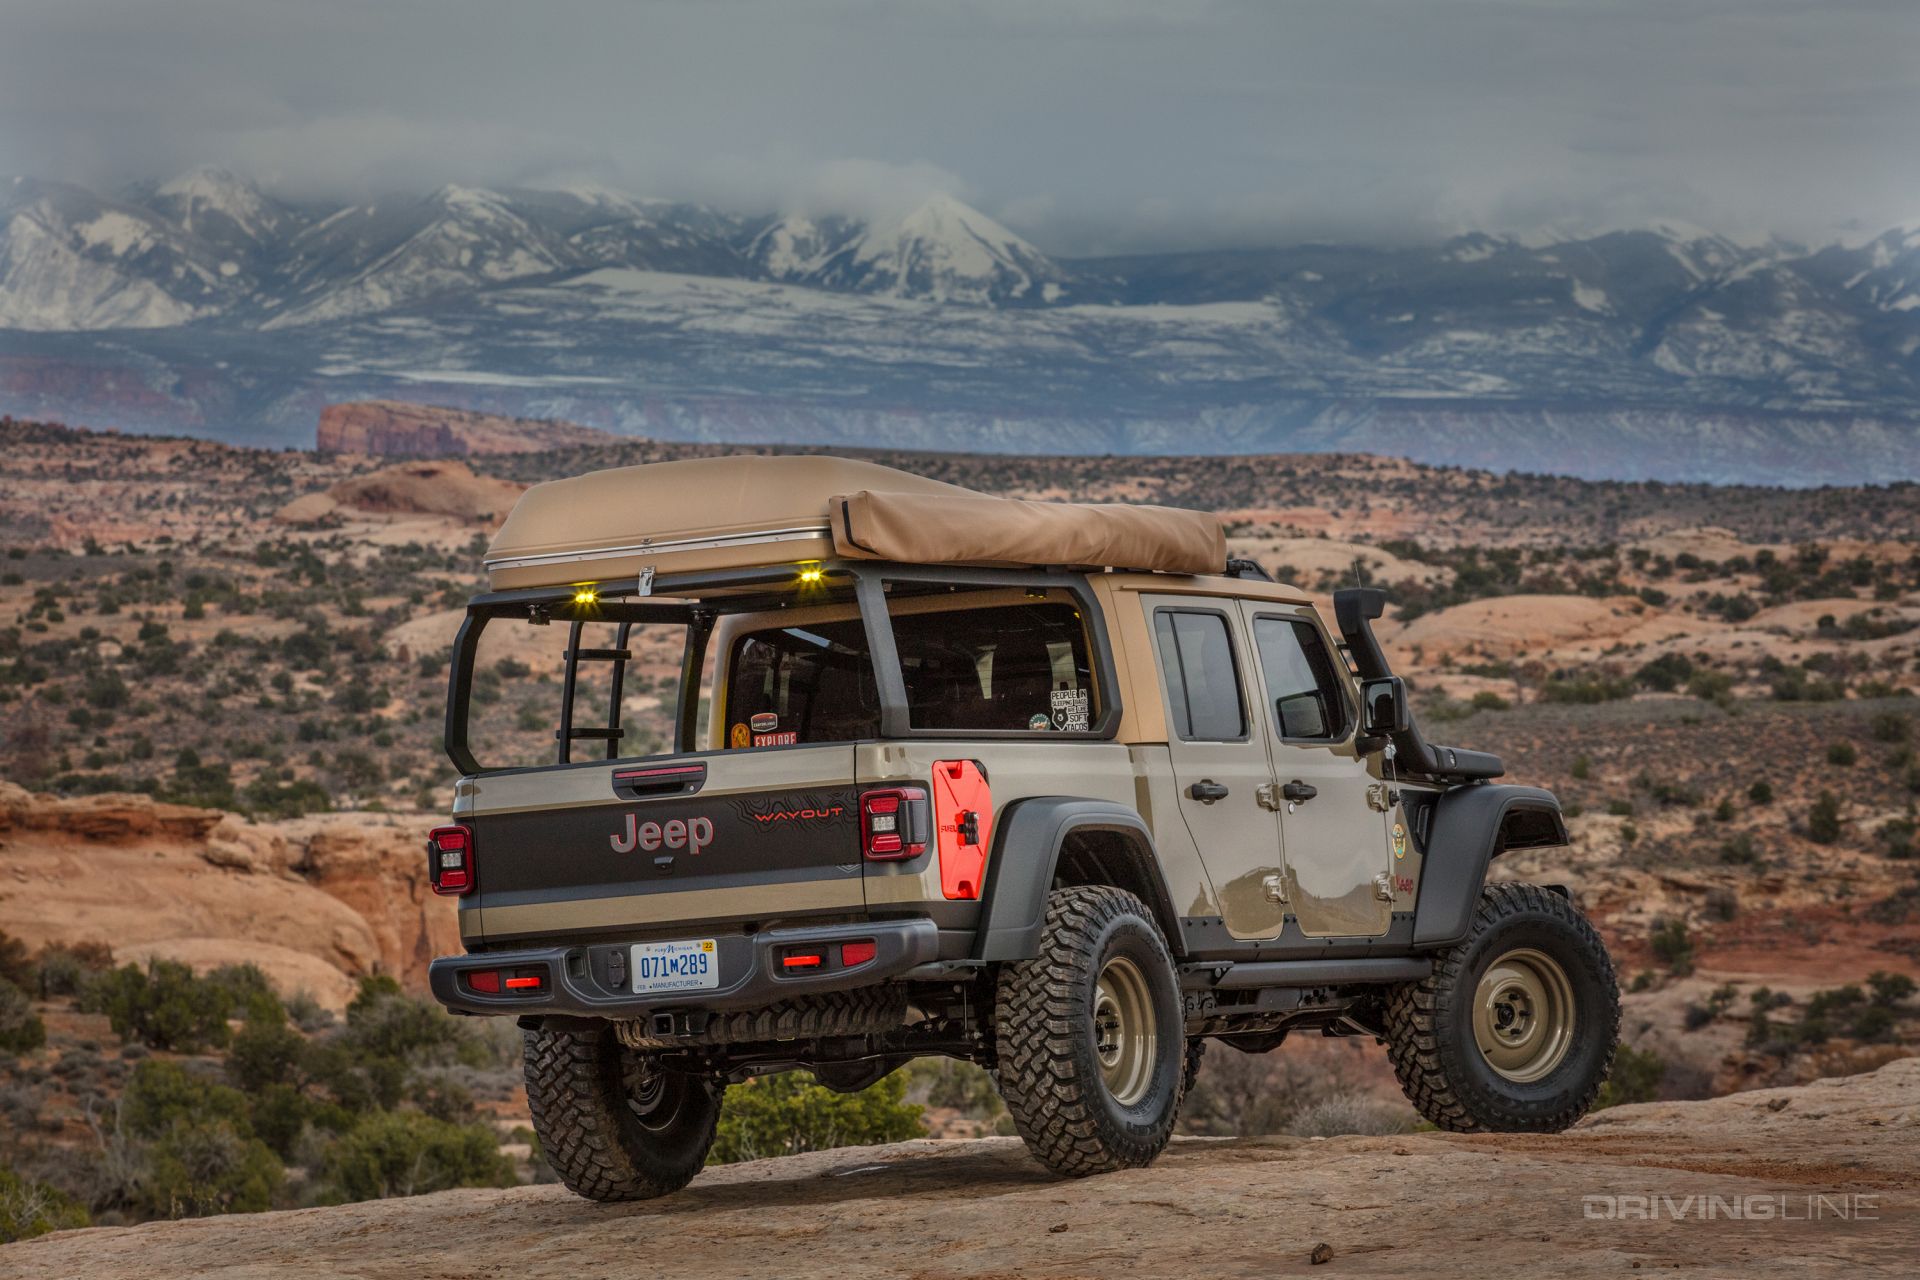 The Ultimate Overland Jeep Gladiator is Coming.